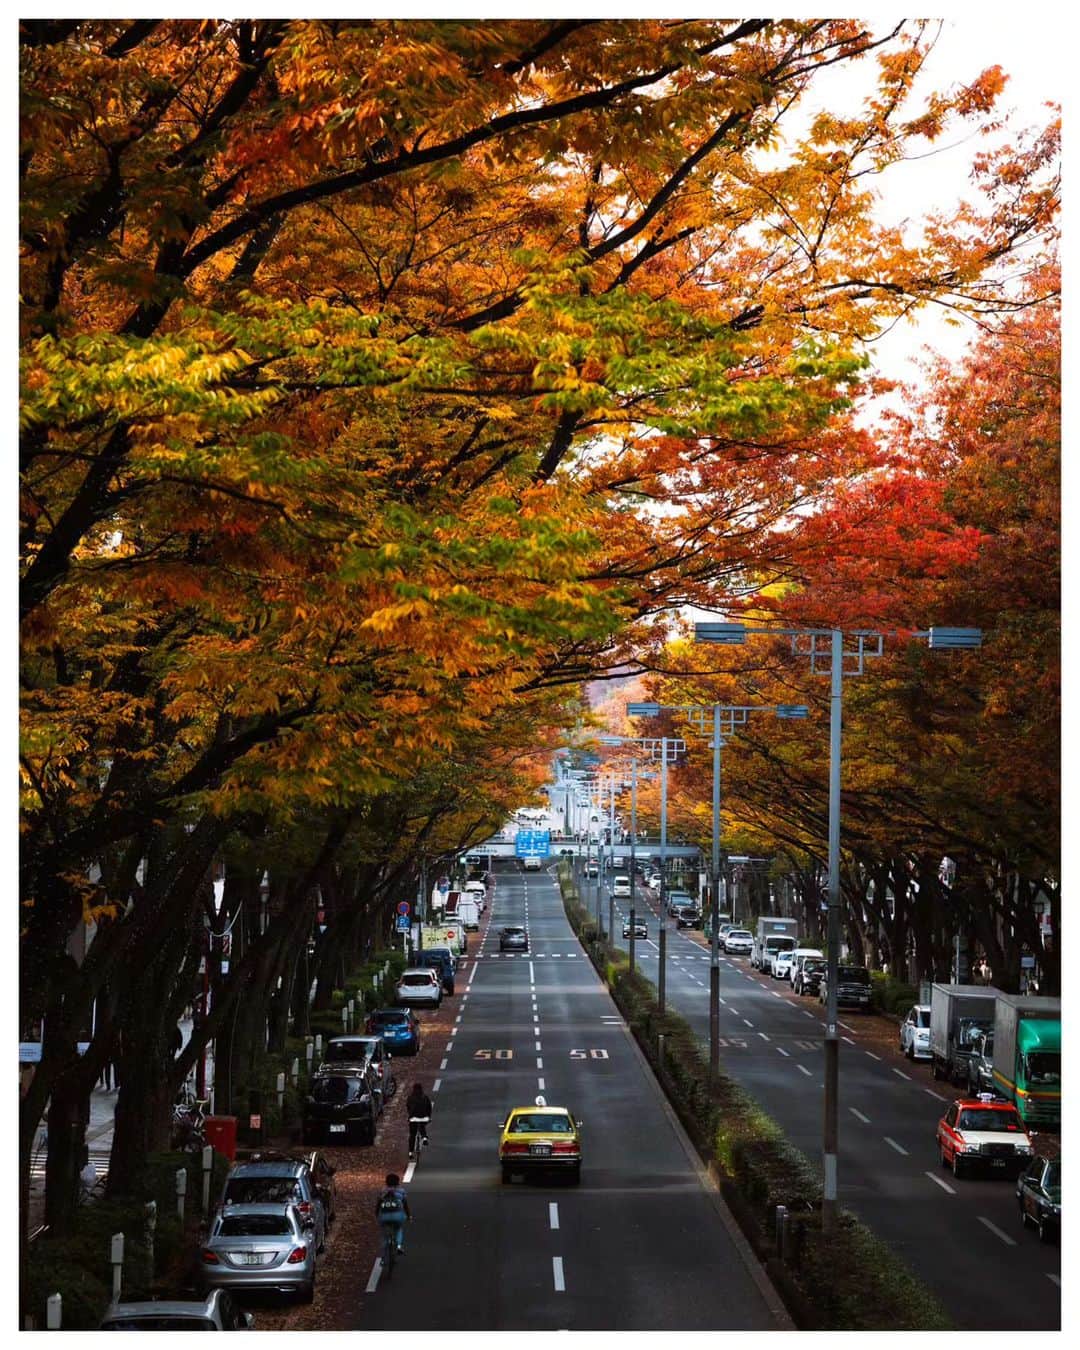 Takashi Yasuiのインスタグラム：「Tokyo 🍁 November 2016  📕My photo book - worldwide shipping daily - 🖥 Lightroom presets ▶▶Link in bio  #USETSU #USETSUpresets #TakashiYasui #SPiCollective #filmic_streets #ASPfeatures #photocinematica #STREETGRAMMERS #street_storytelling #bcncollective #ifyouleave #sublimestreet #streetfinder #timeless_streets #MadeWithLightroom #worldviewmag #hellofrom #reco_ig」